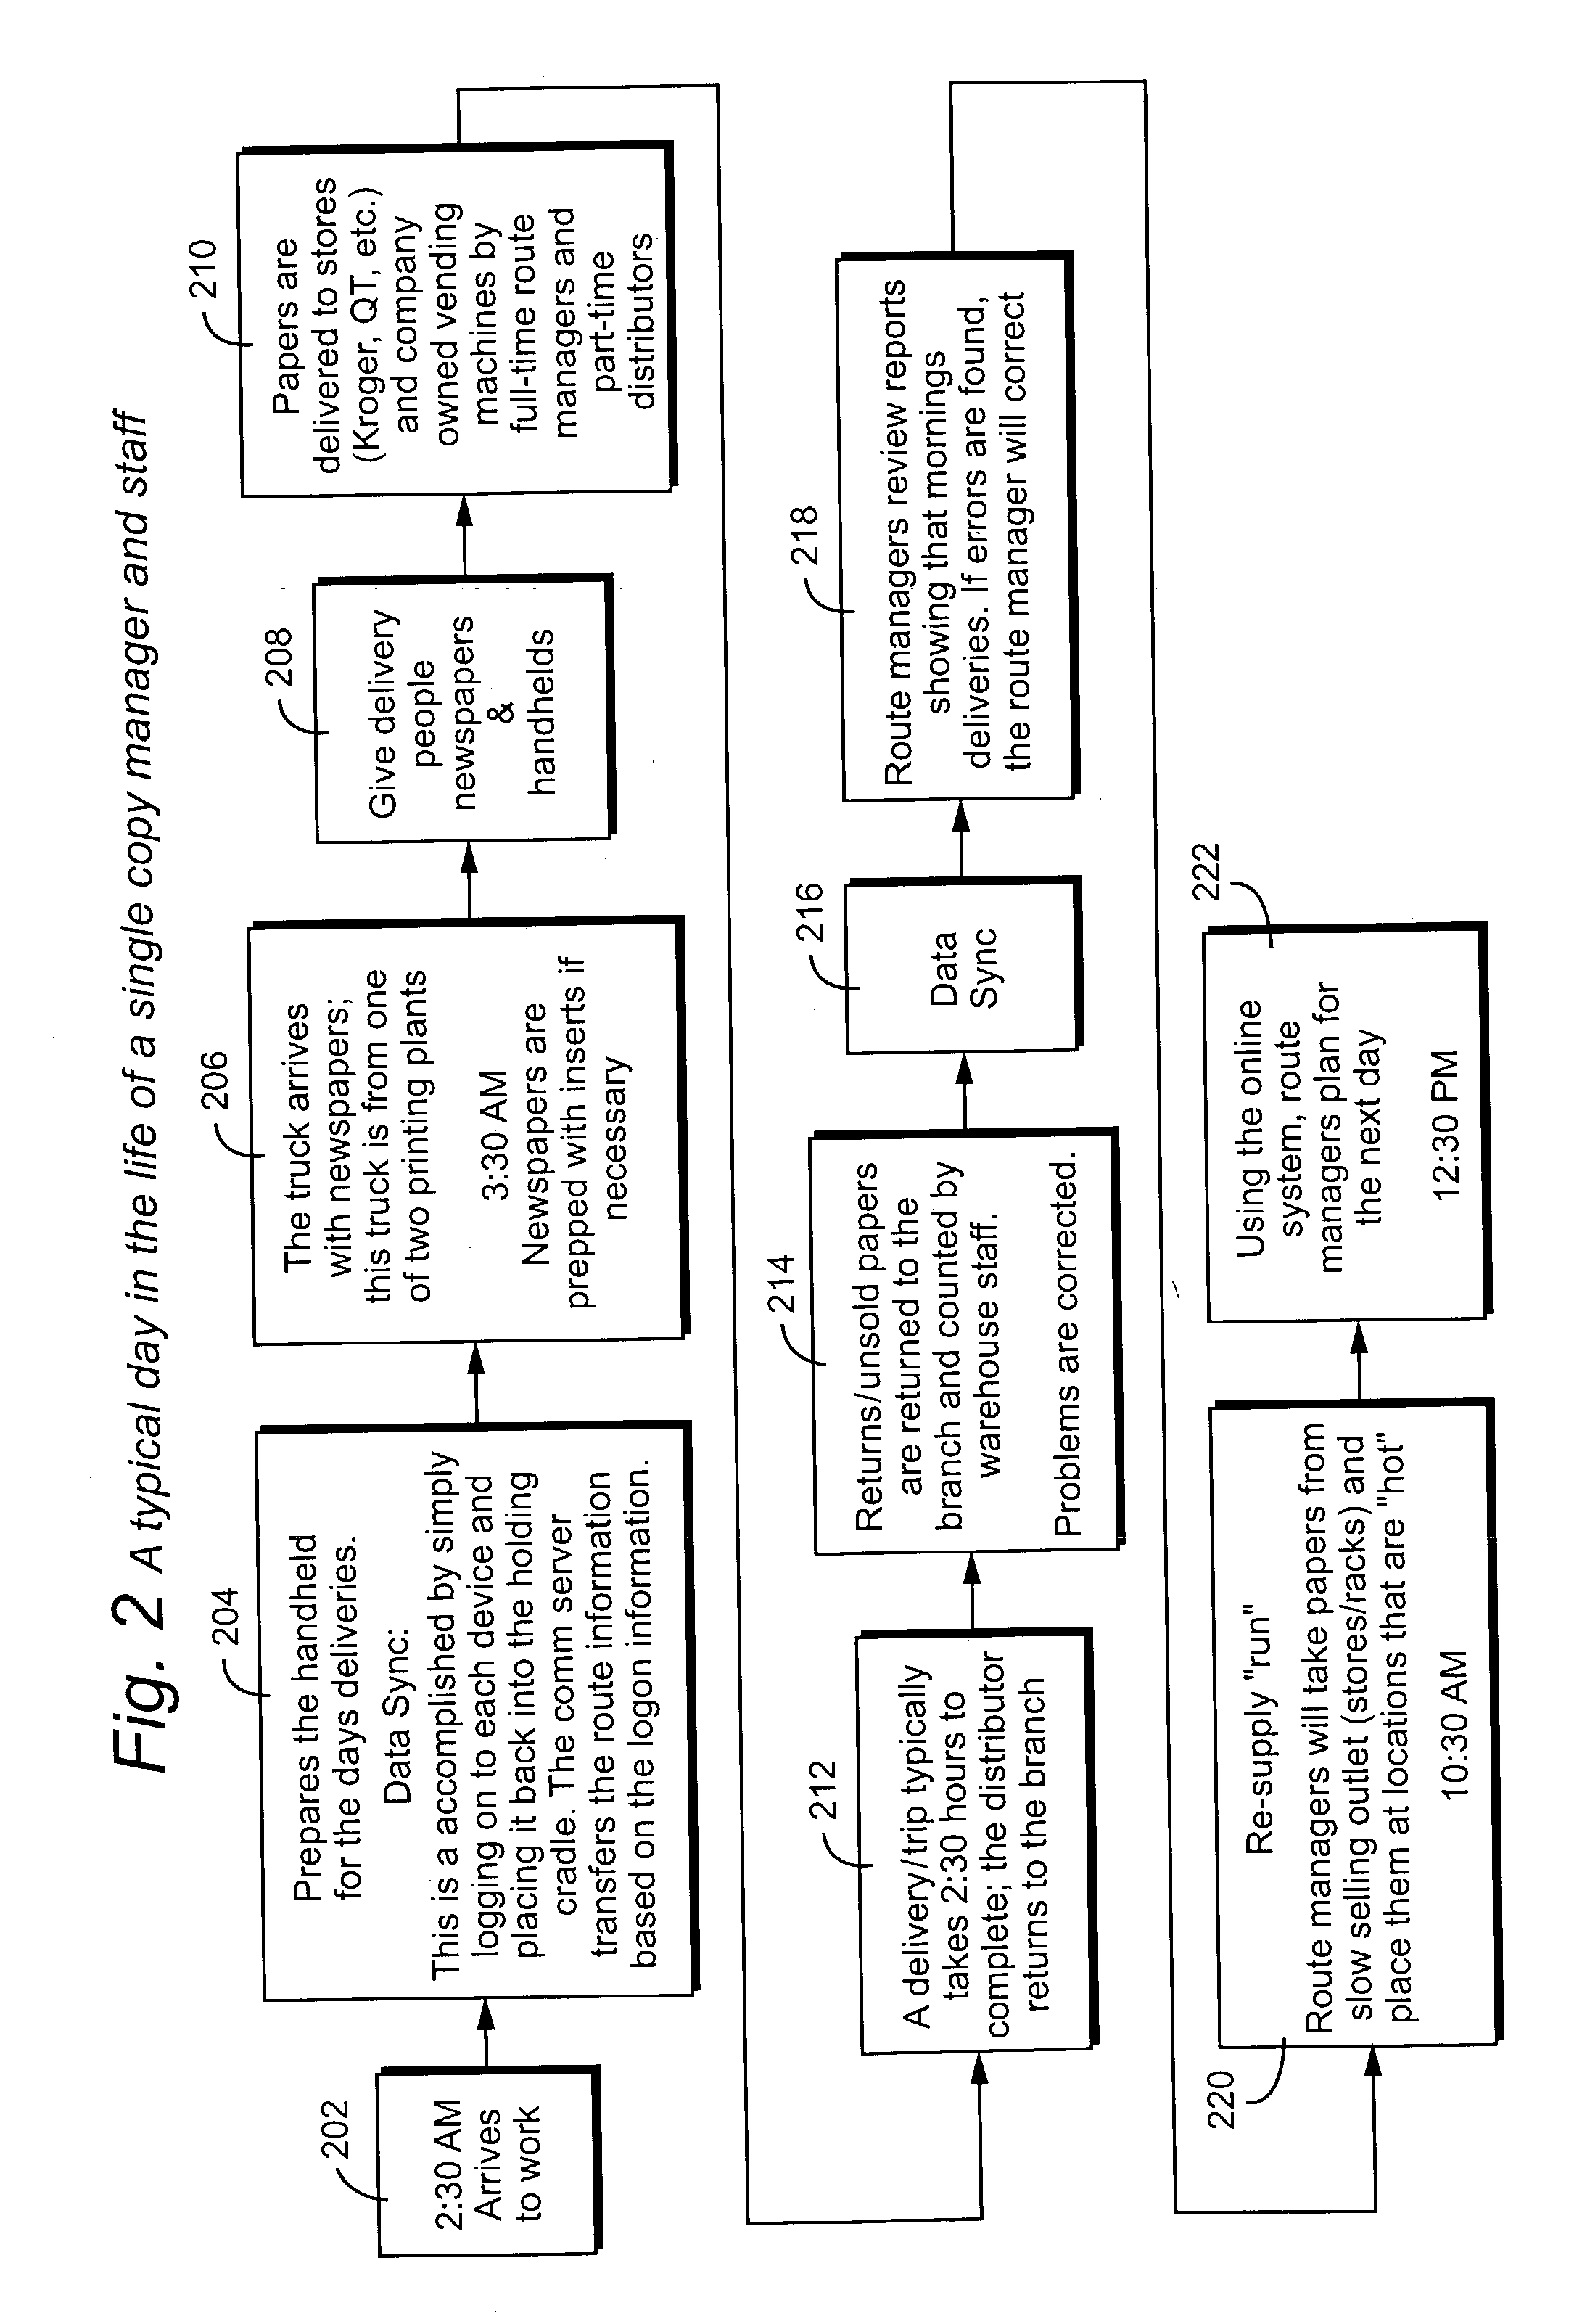 Method and apparatus for supporting delivery, sale and billing of perishable and time-sensitive goods such as newspapers, periodicals and direct marketing and promotional materials